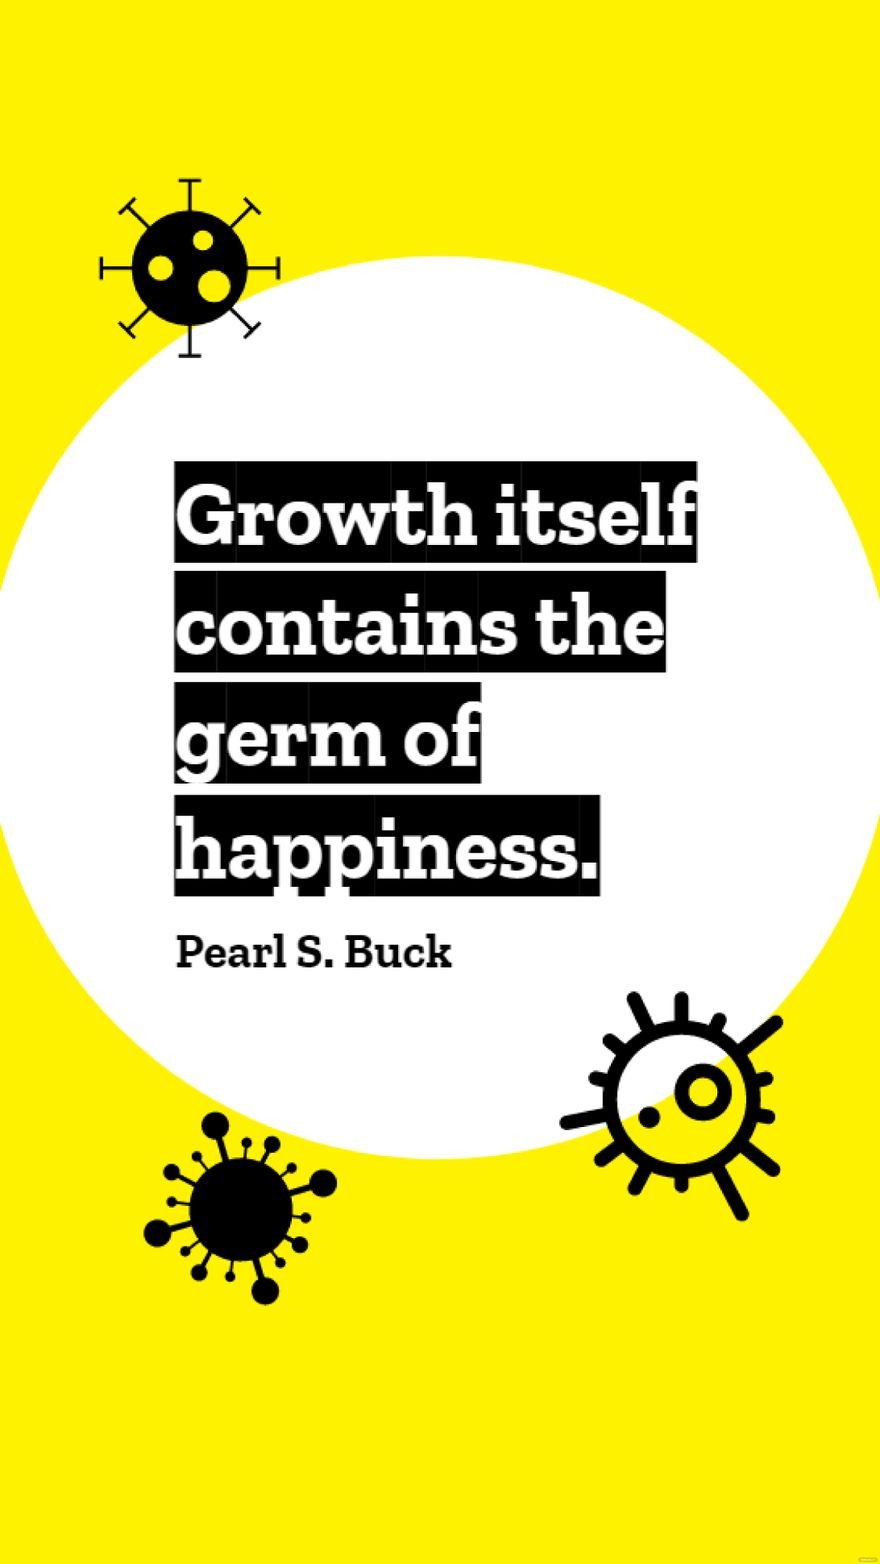 Pearl S. Buck - Growth itself contains the germ of happiness.